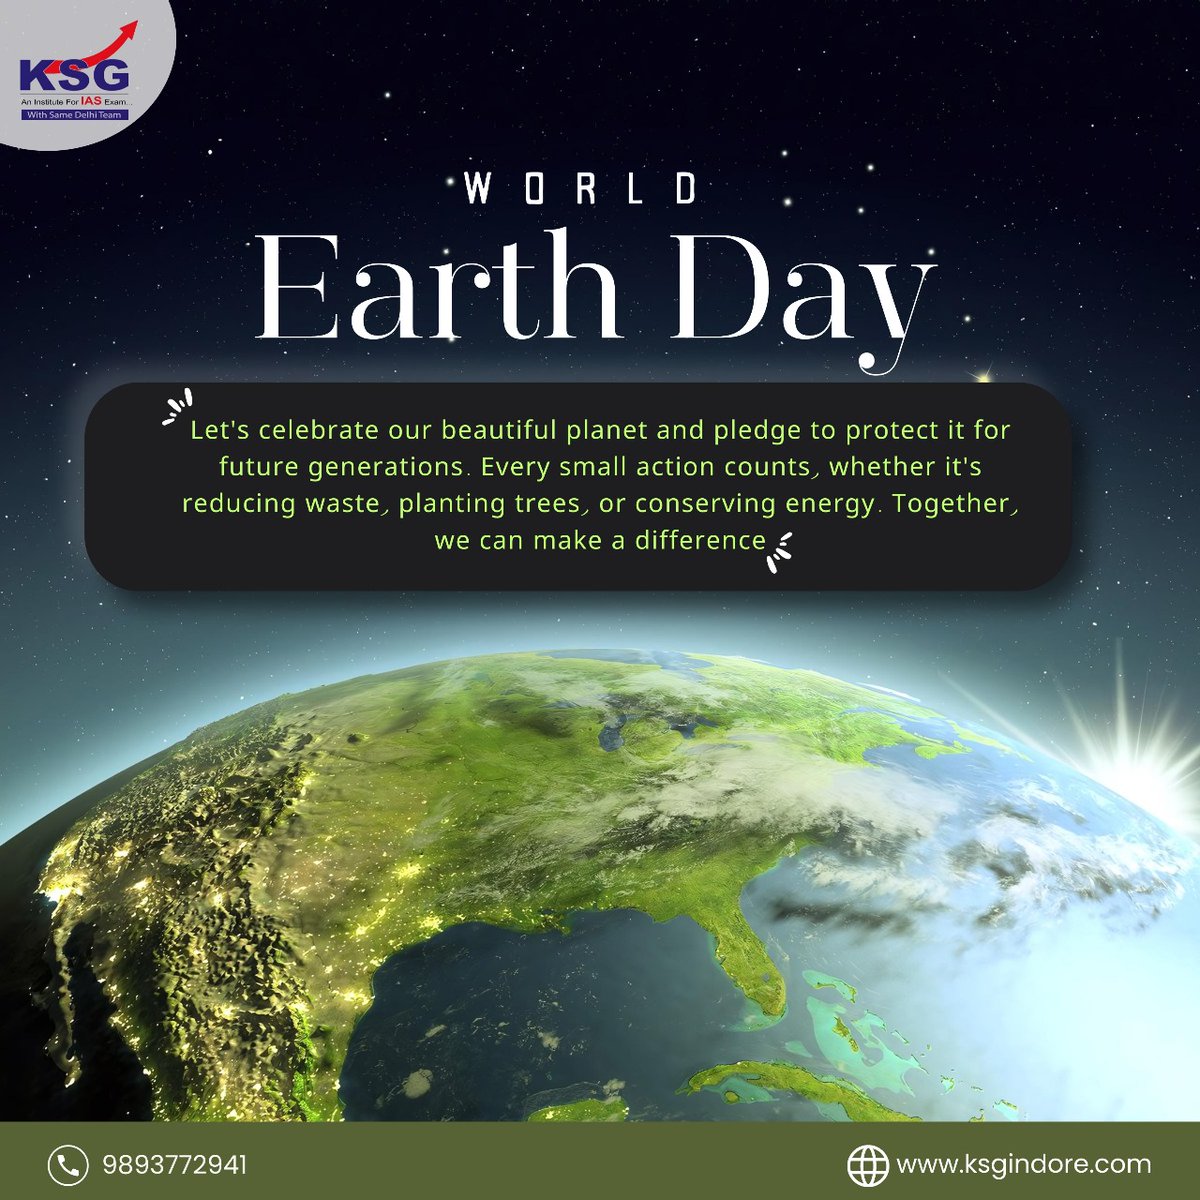 Happy World Earth Day 🌏

#KSGIndore #UPSCPreparation #CivilServicesExam #IASCoaching #WorldEarthDay #EarthDay #SavePlanetEarth #ProtectOurPlanet #SustainableLiving #EcoFriendly #GreenEarth #GoGreen